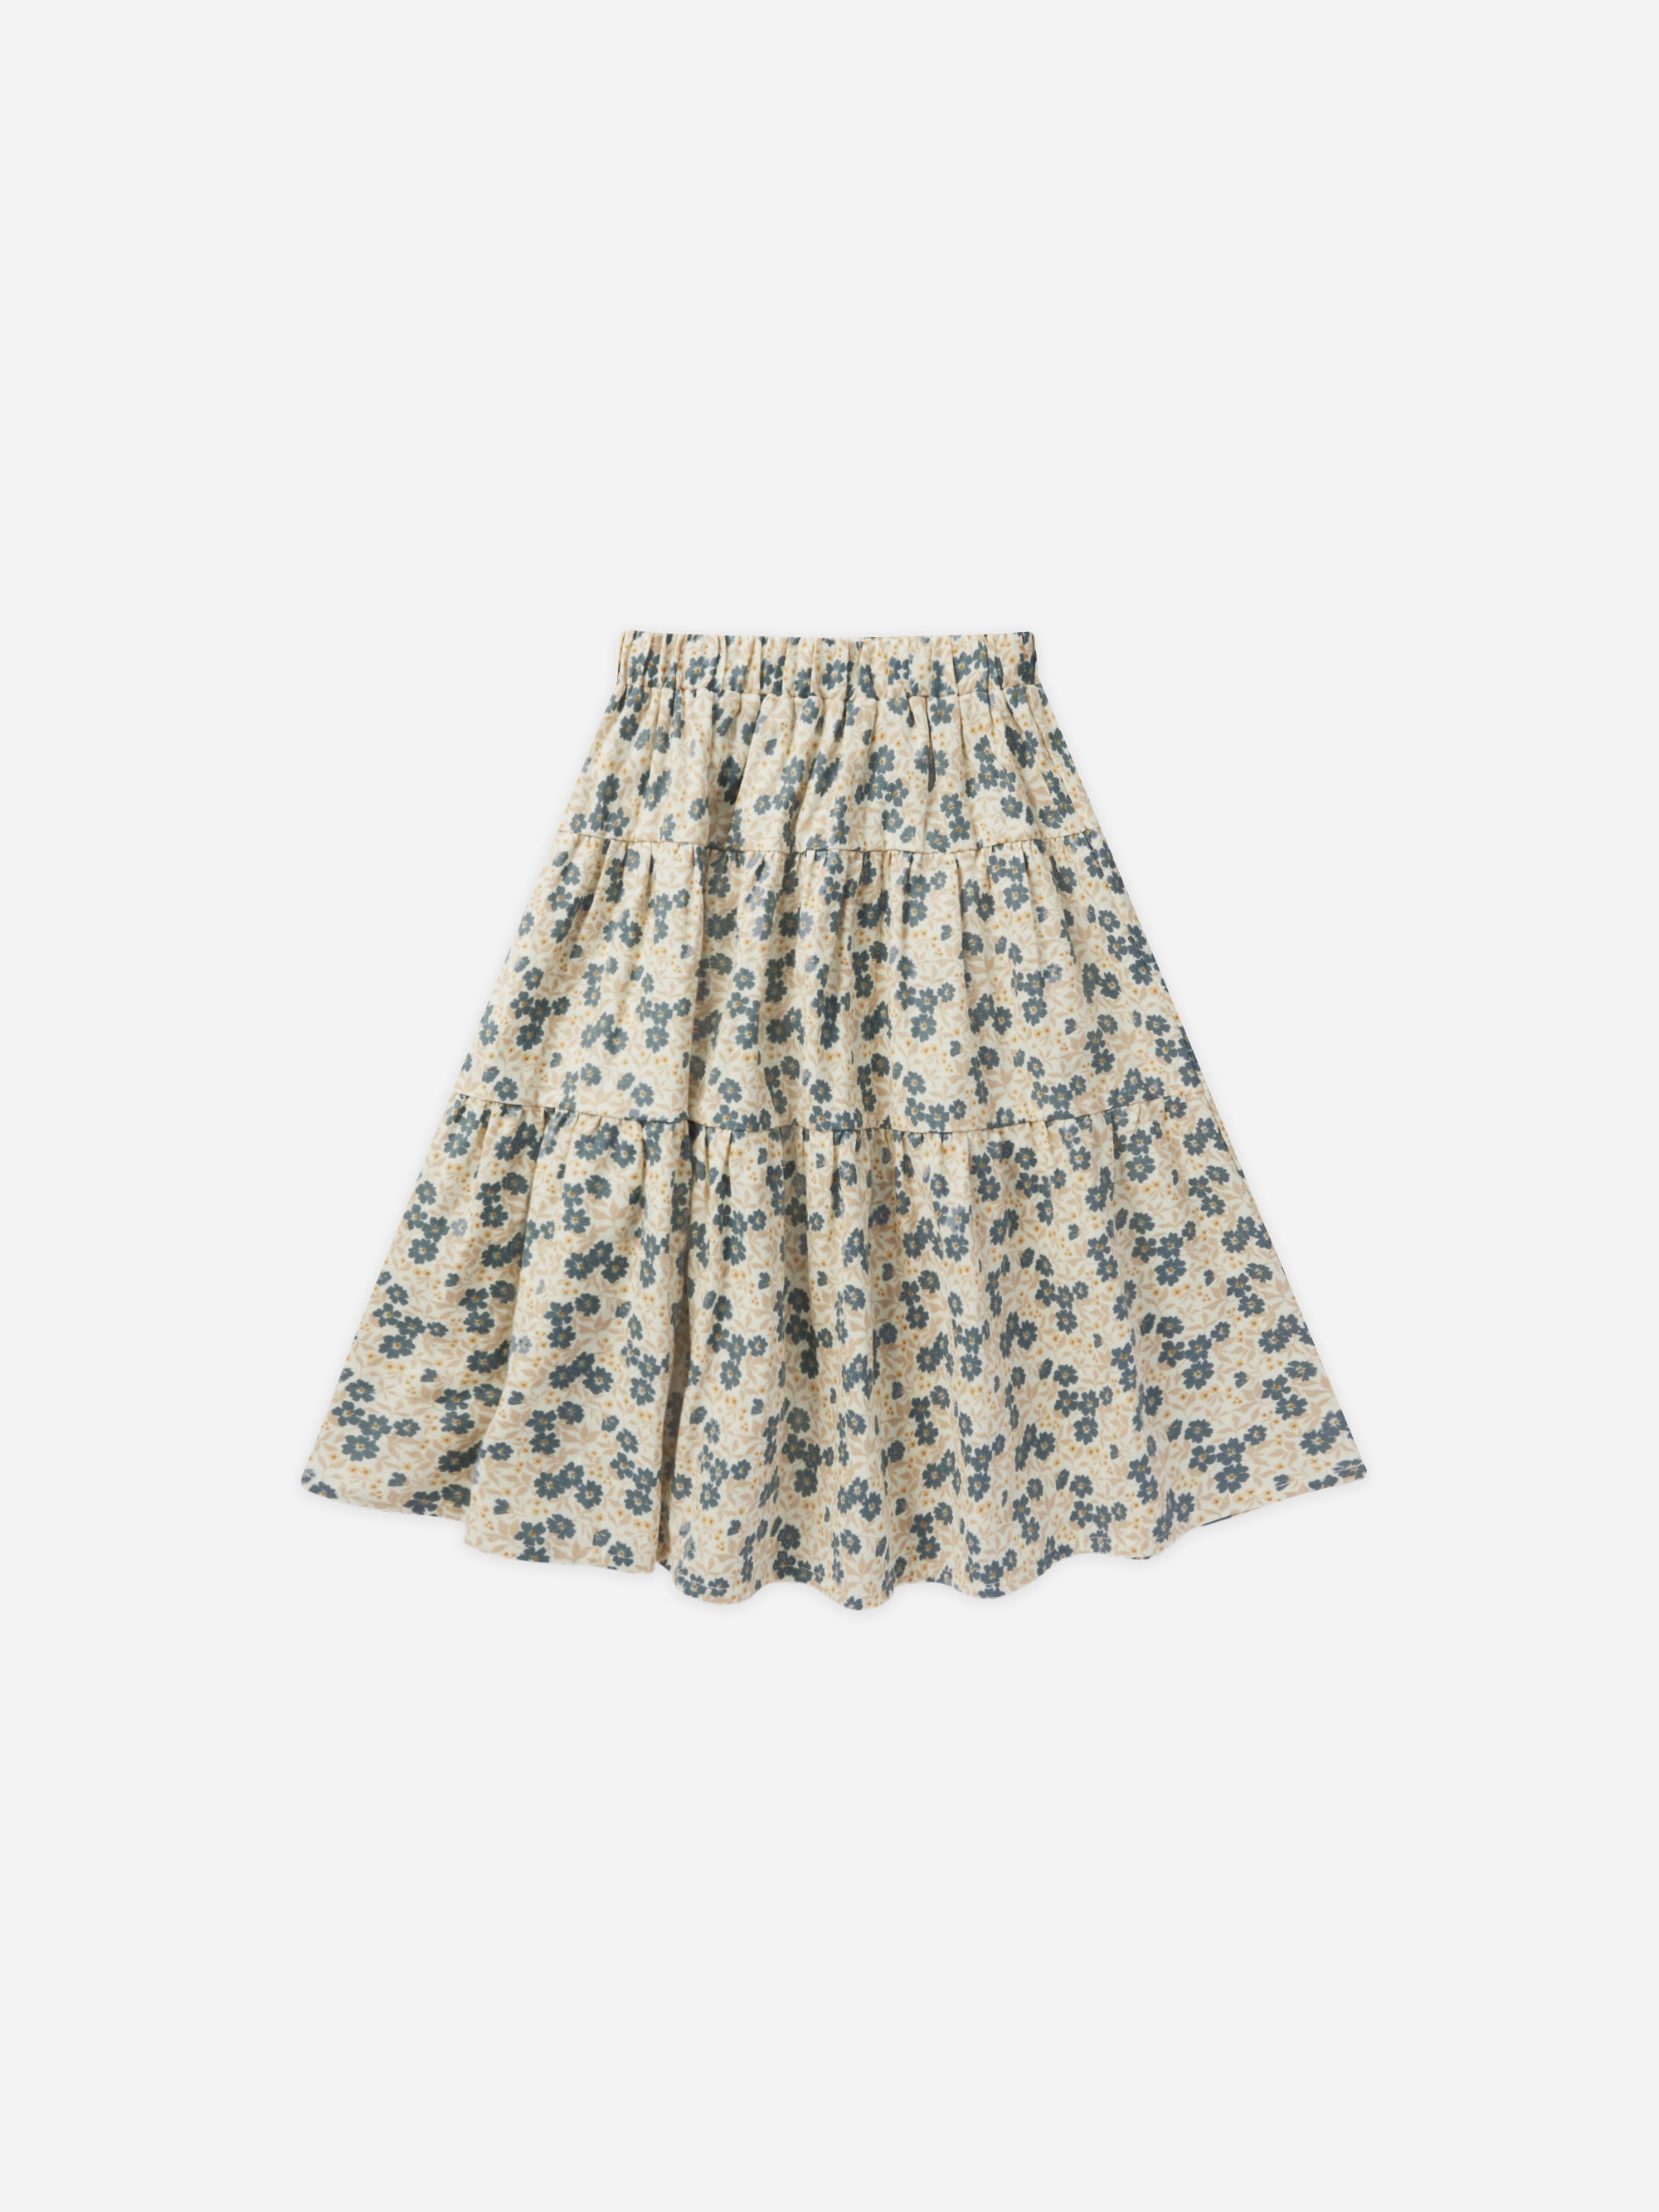 Tiered Midi Skirt || Blue Ditsy - Rylee + Cru | Kids Clothes | Trendy Baby Clothes | Modern Infant Outfits |